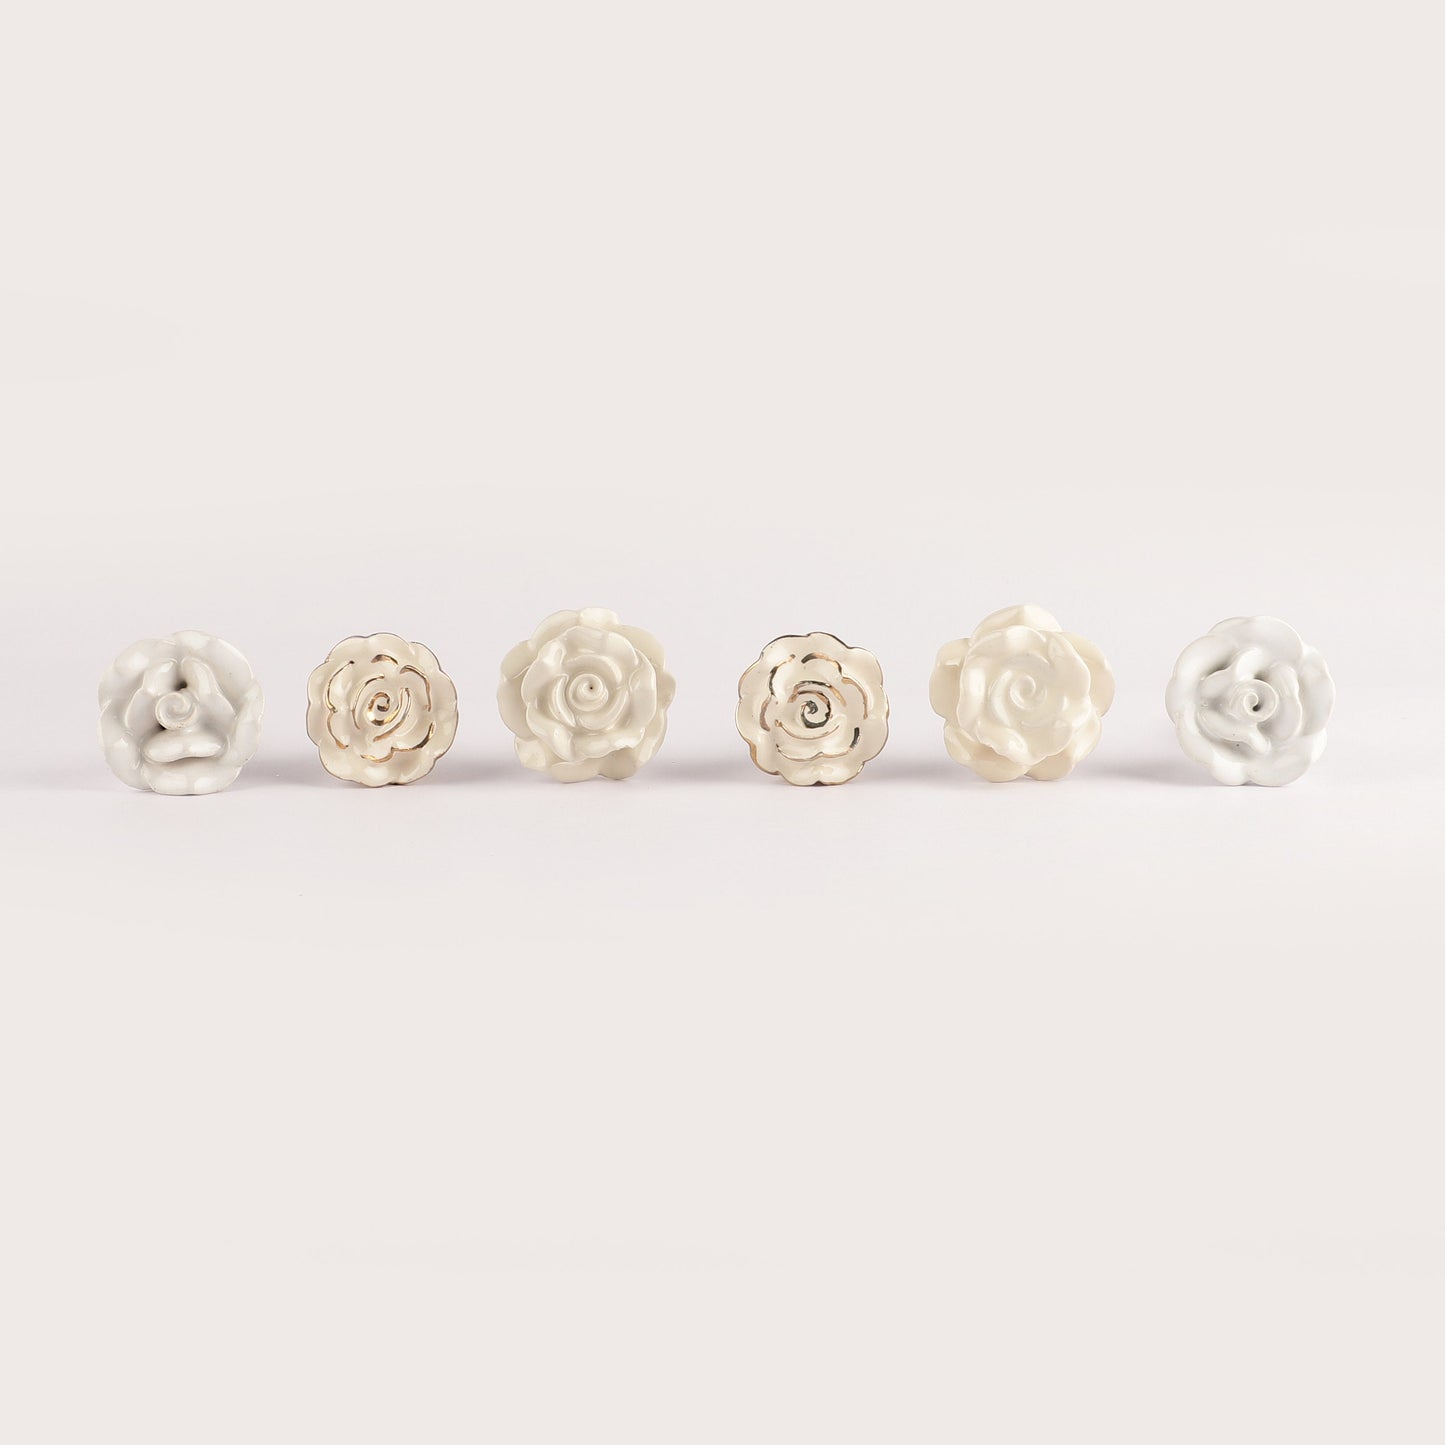 White with Gold, Rose Style Ceramic Pull Knobs (C17)